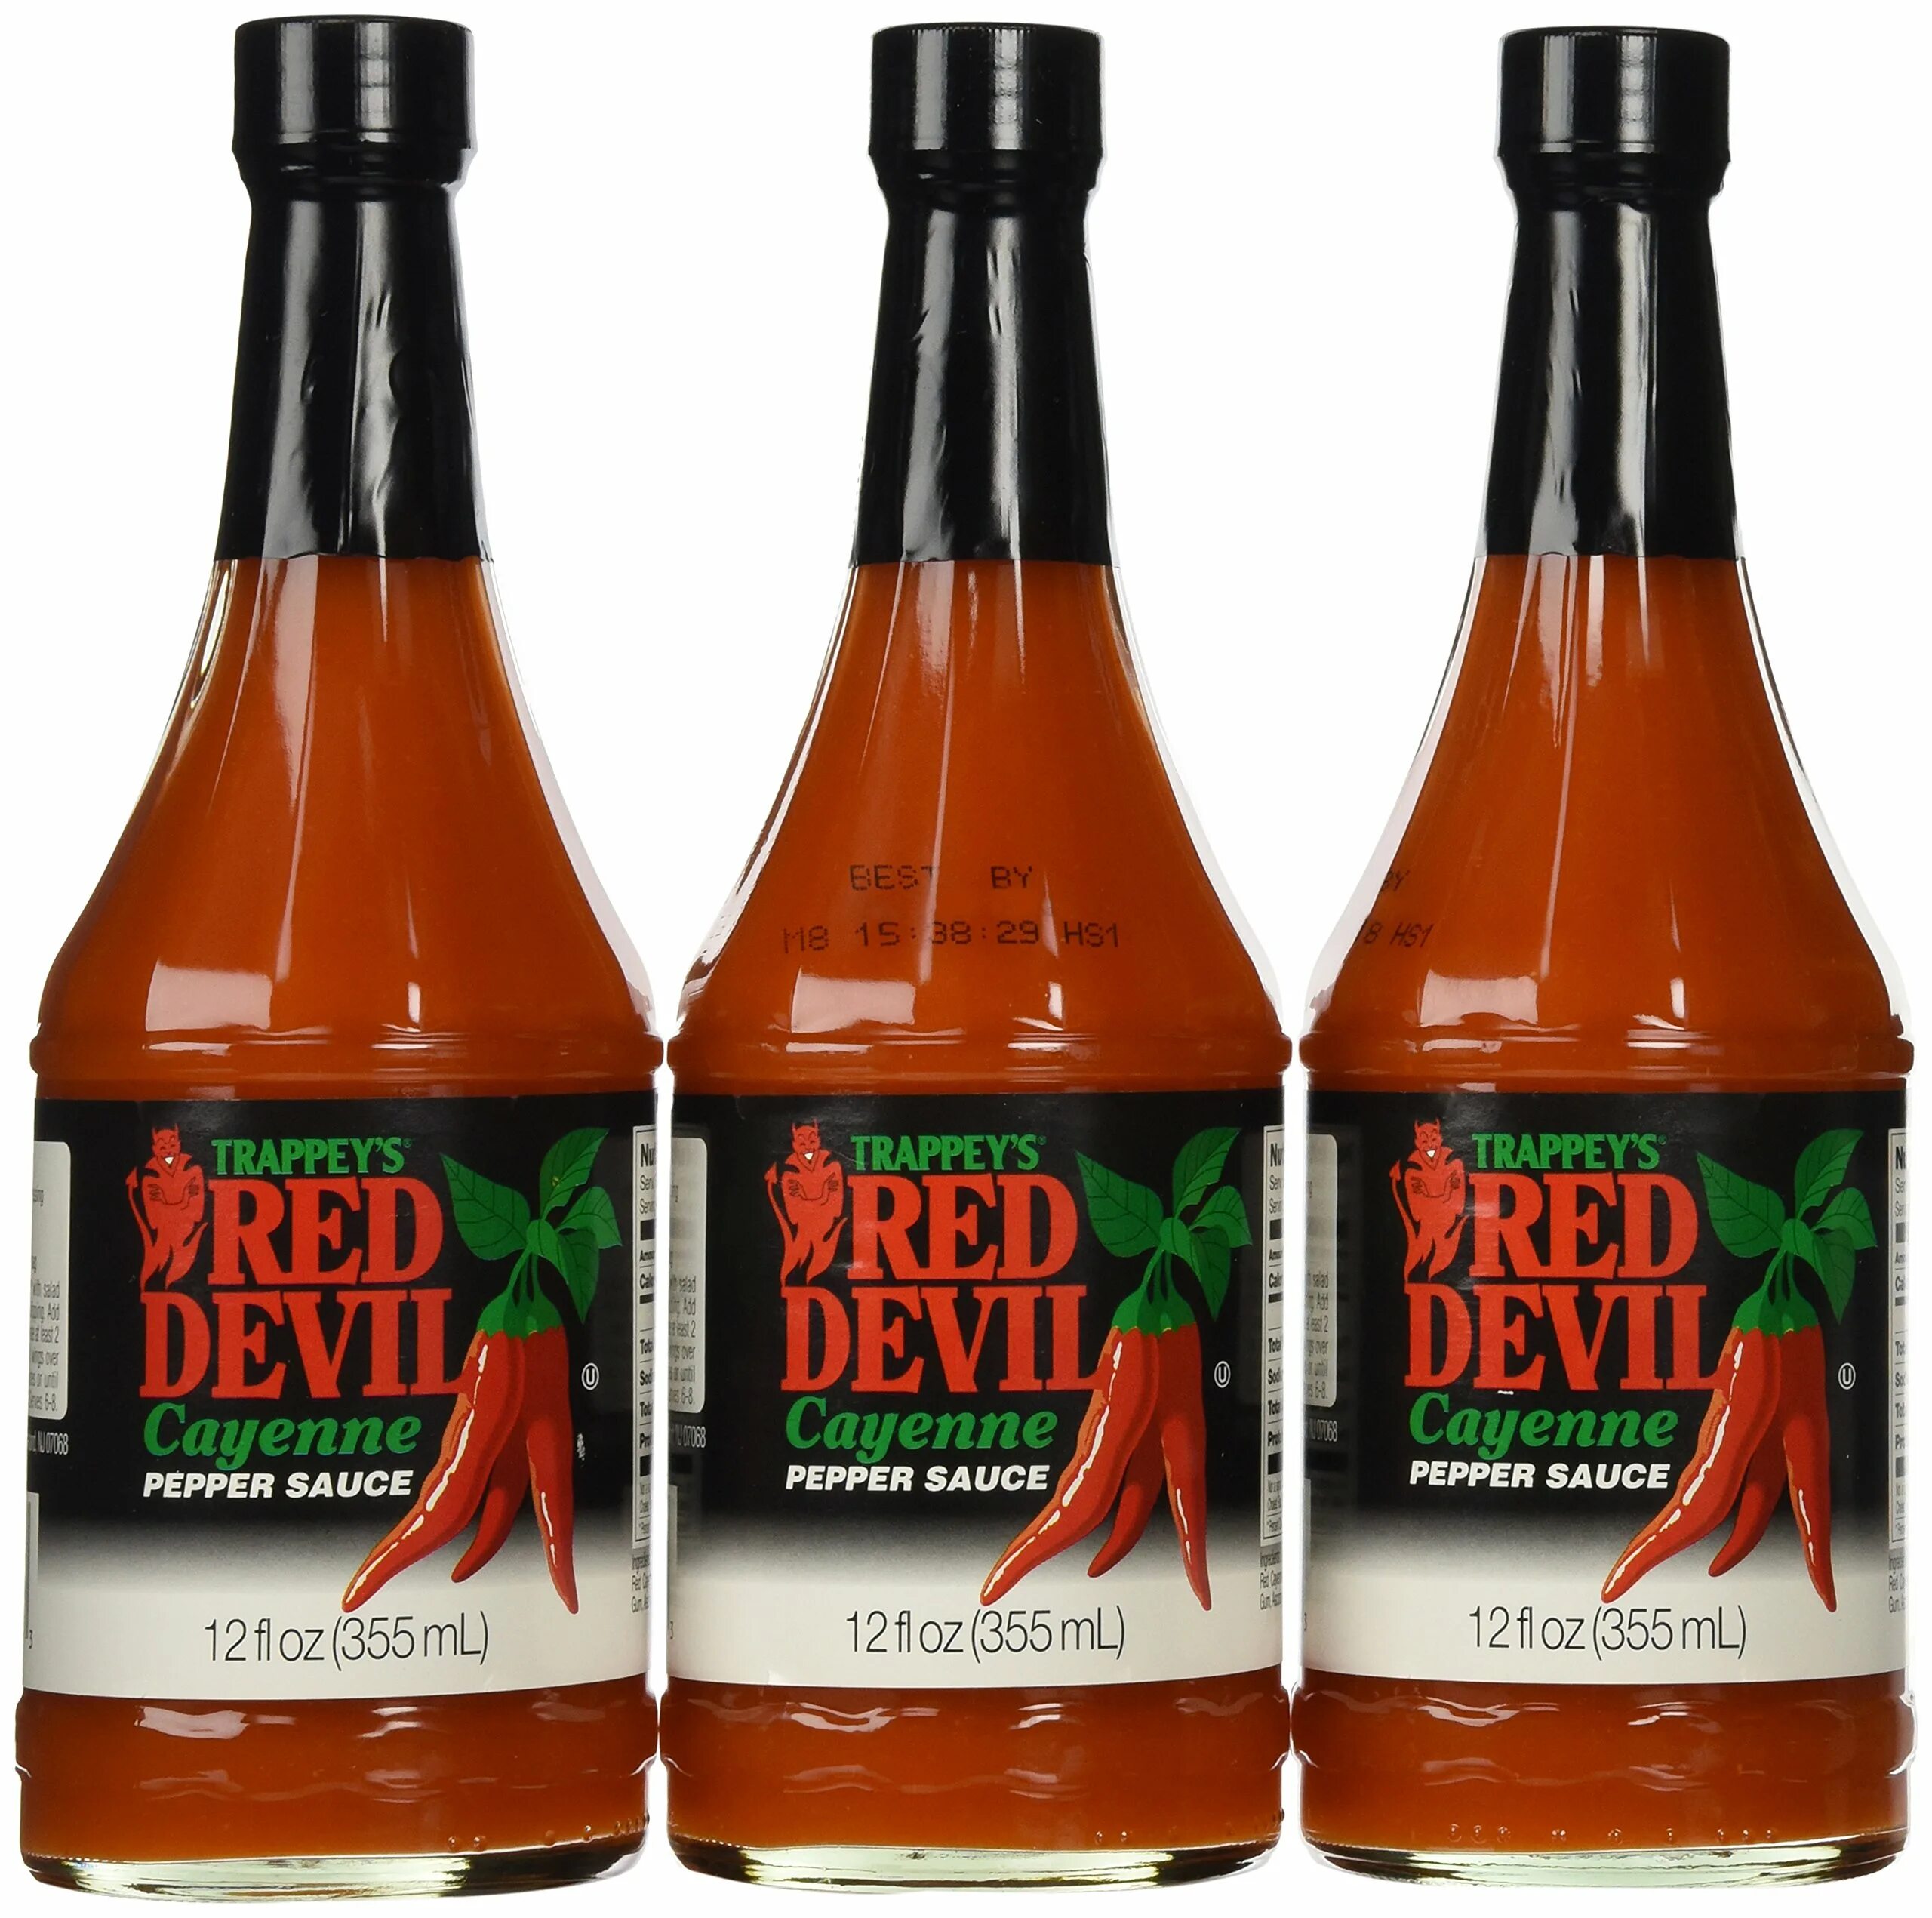 Pepper sauce. Острый соус ред девил. Соус Red Devil Trappeys. Ред девил соус 3.8. Соус перечный Red Devil, Trappey's.